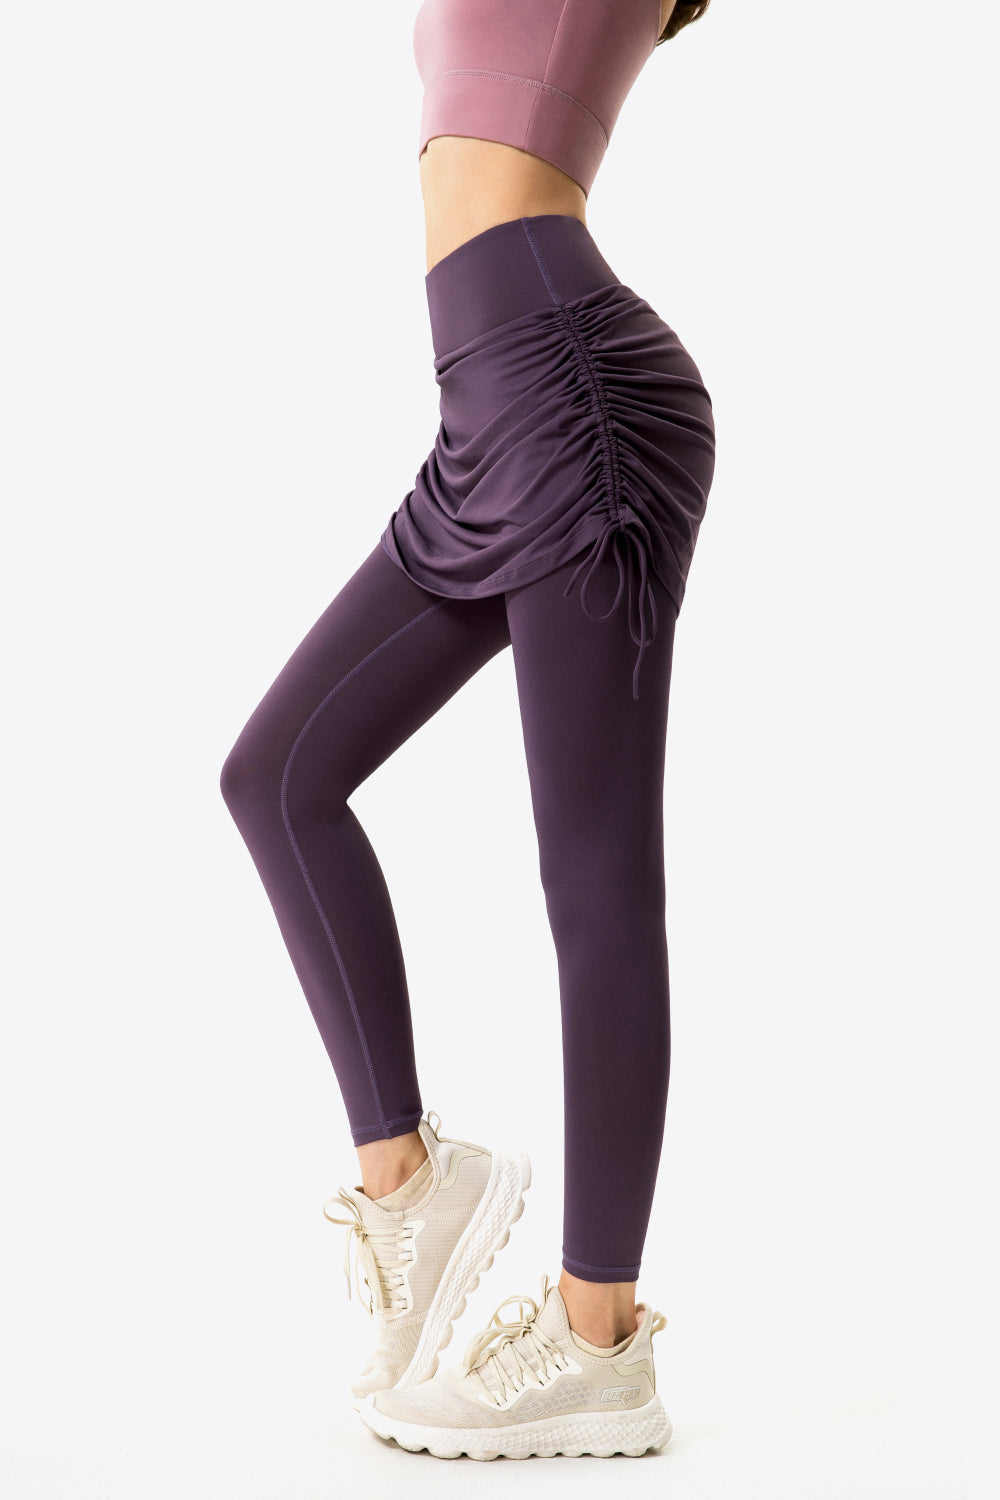 Drawstring Ruched Faux Layered Yoga Leggings - Women’s Clothing & Accessories - Pants - 22 - 2024